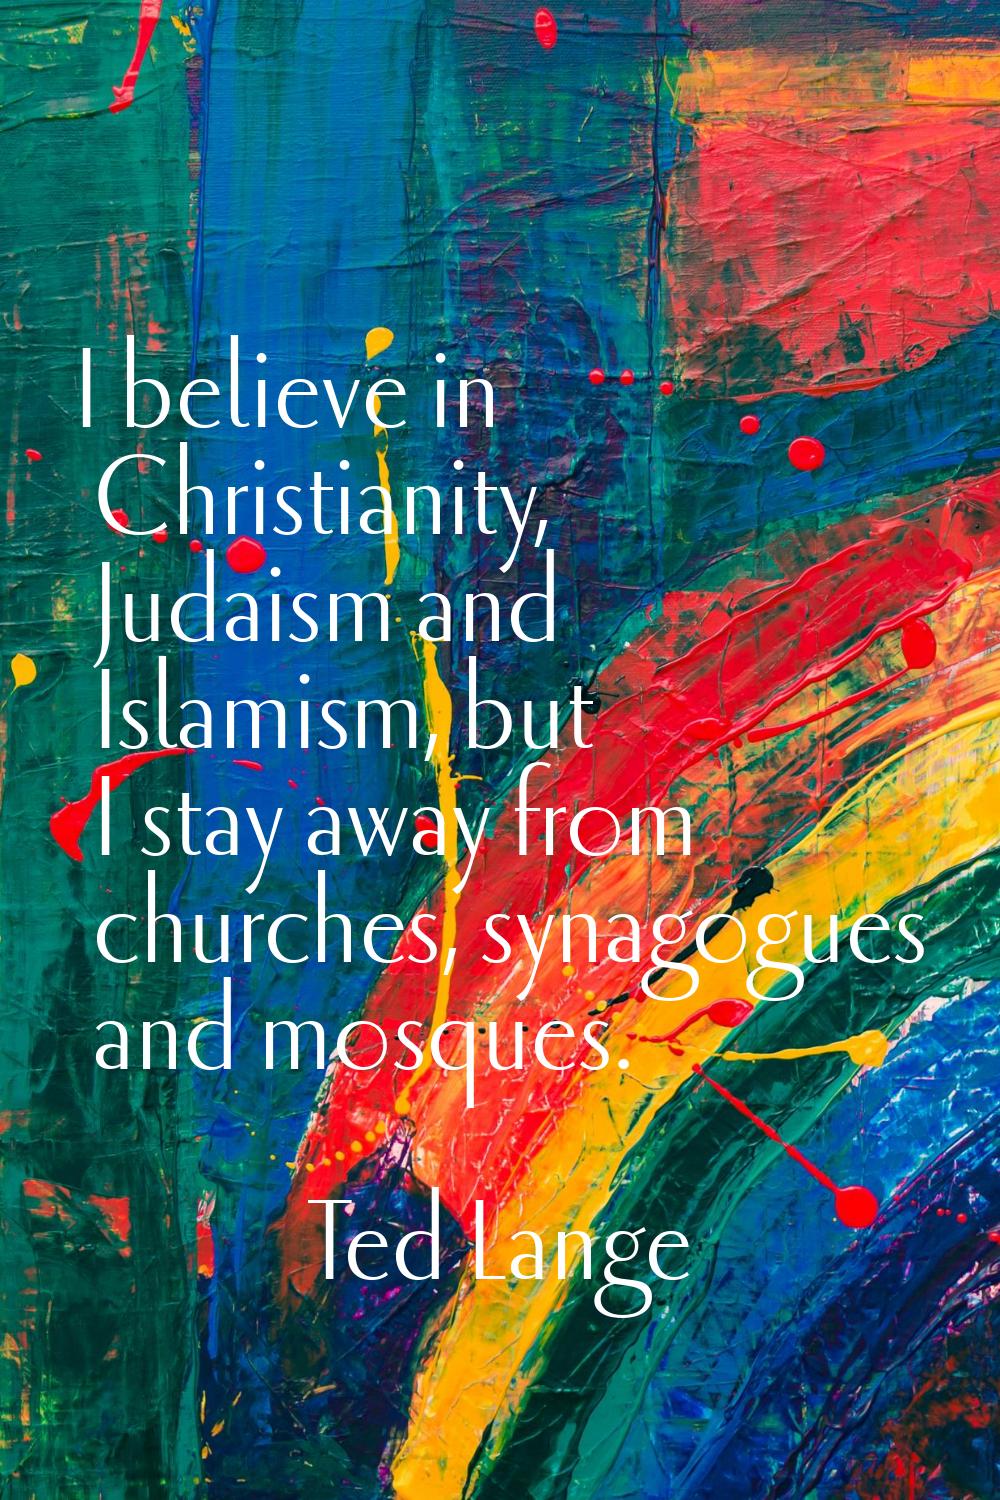 I believe in Christianity, Judaism and Islamism, but I stay away from churches, synagogues and mosq